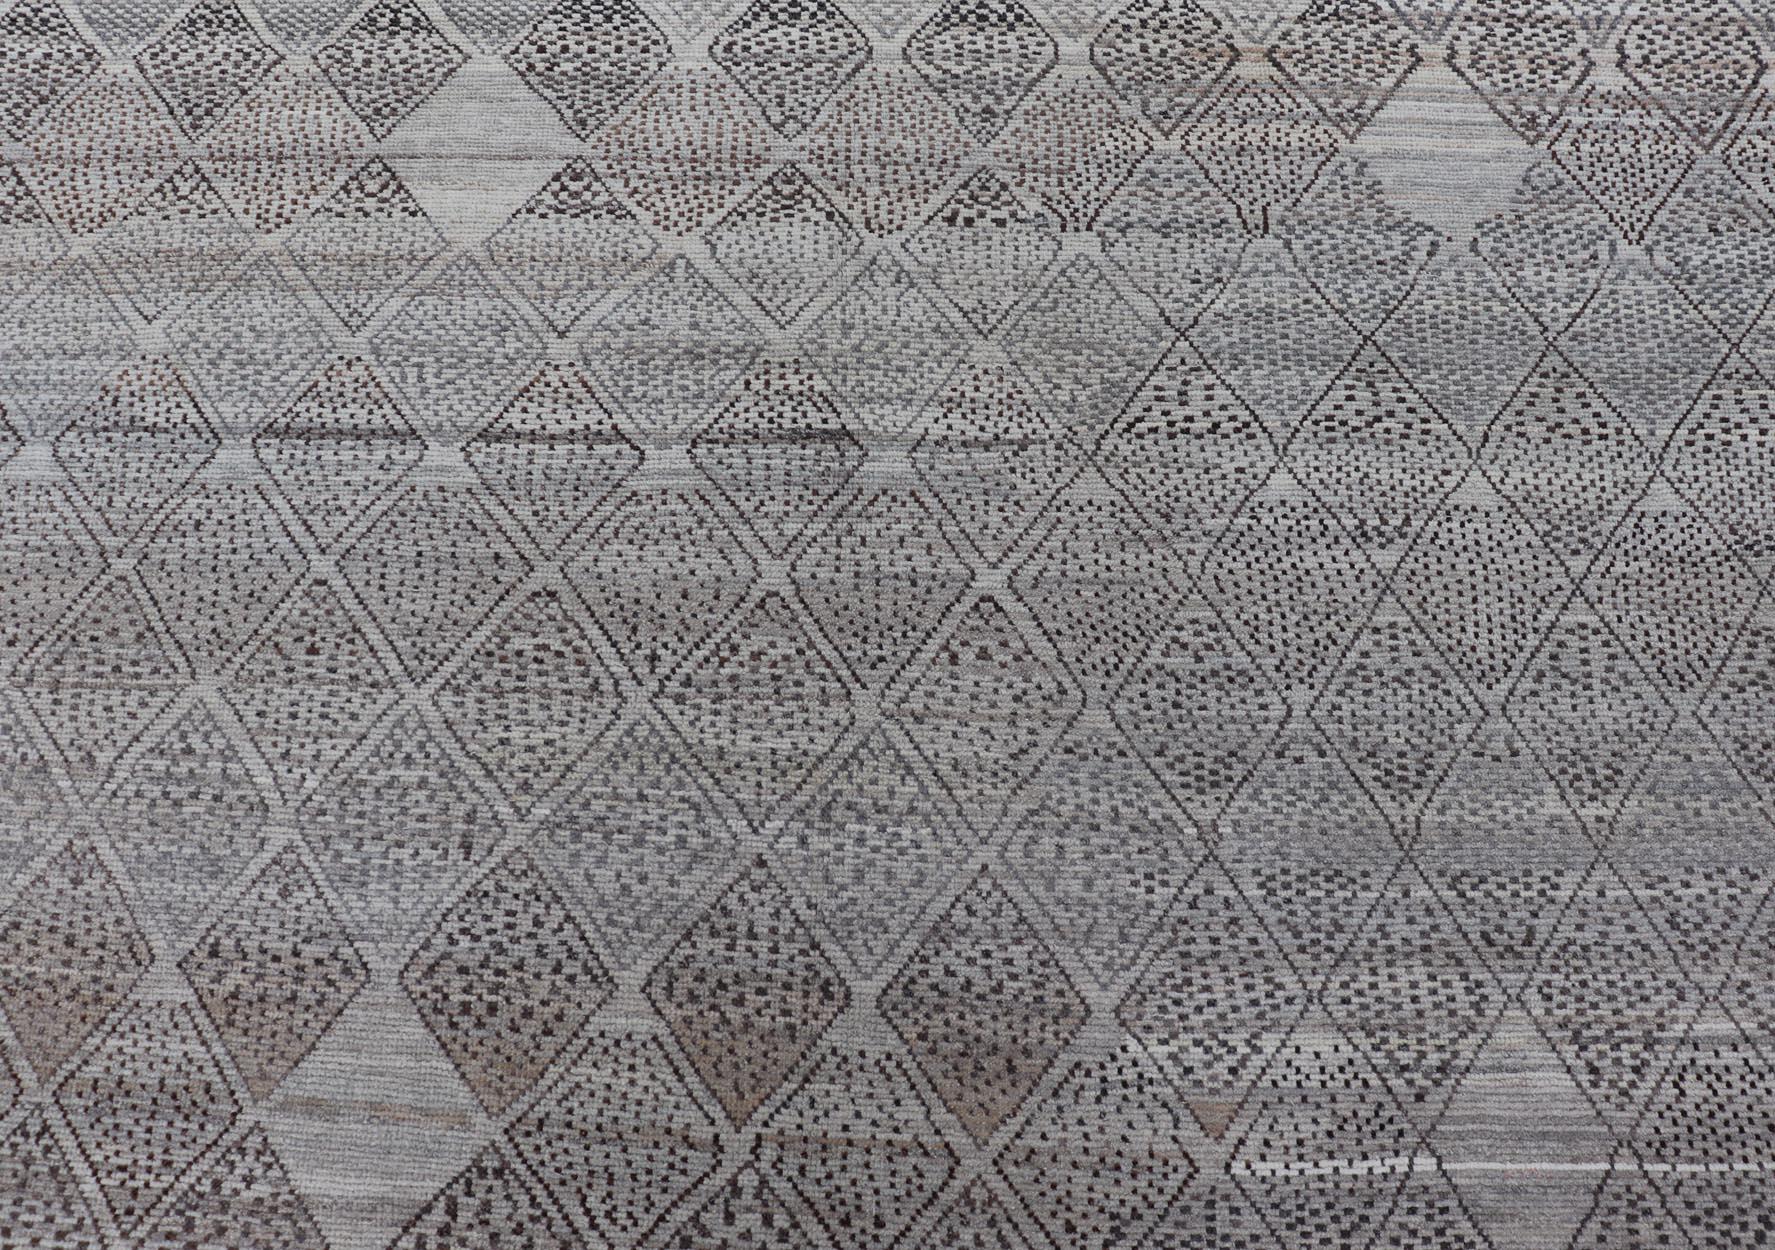 Very Large Modern Rug with Diamond Design in Gray, Taupe & Earth Tones For Sale 3